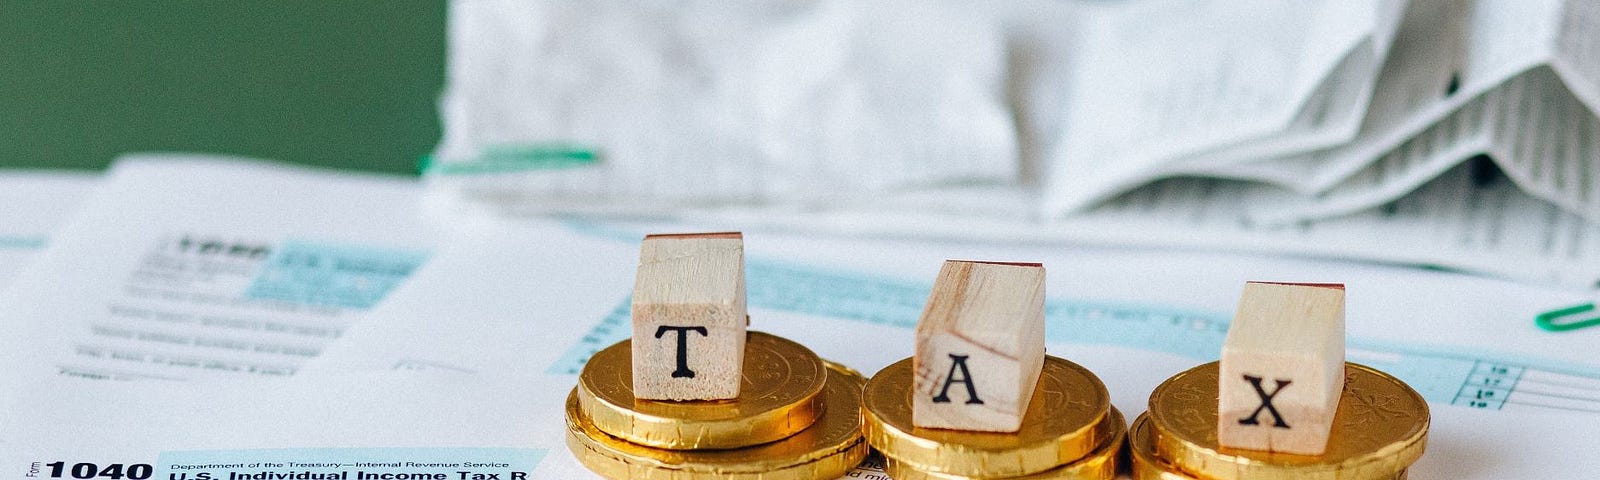 Wood blocks spelling “TAX” set atop three piles of golden coins standing on tax forms.